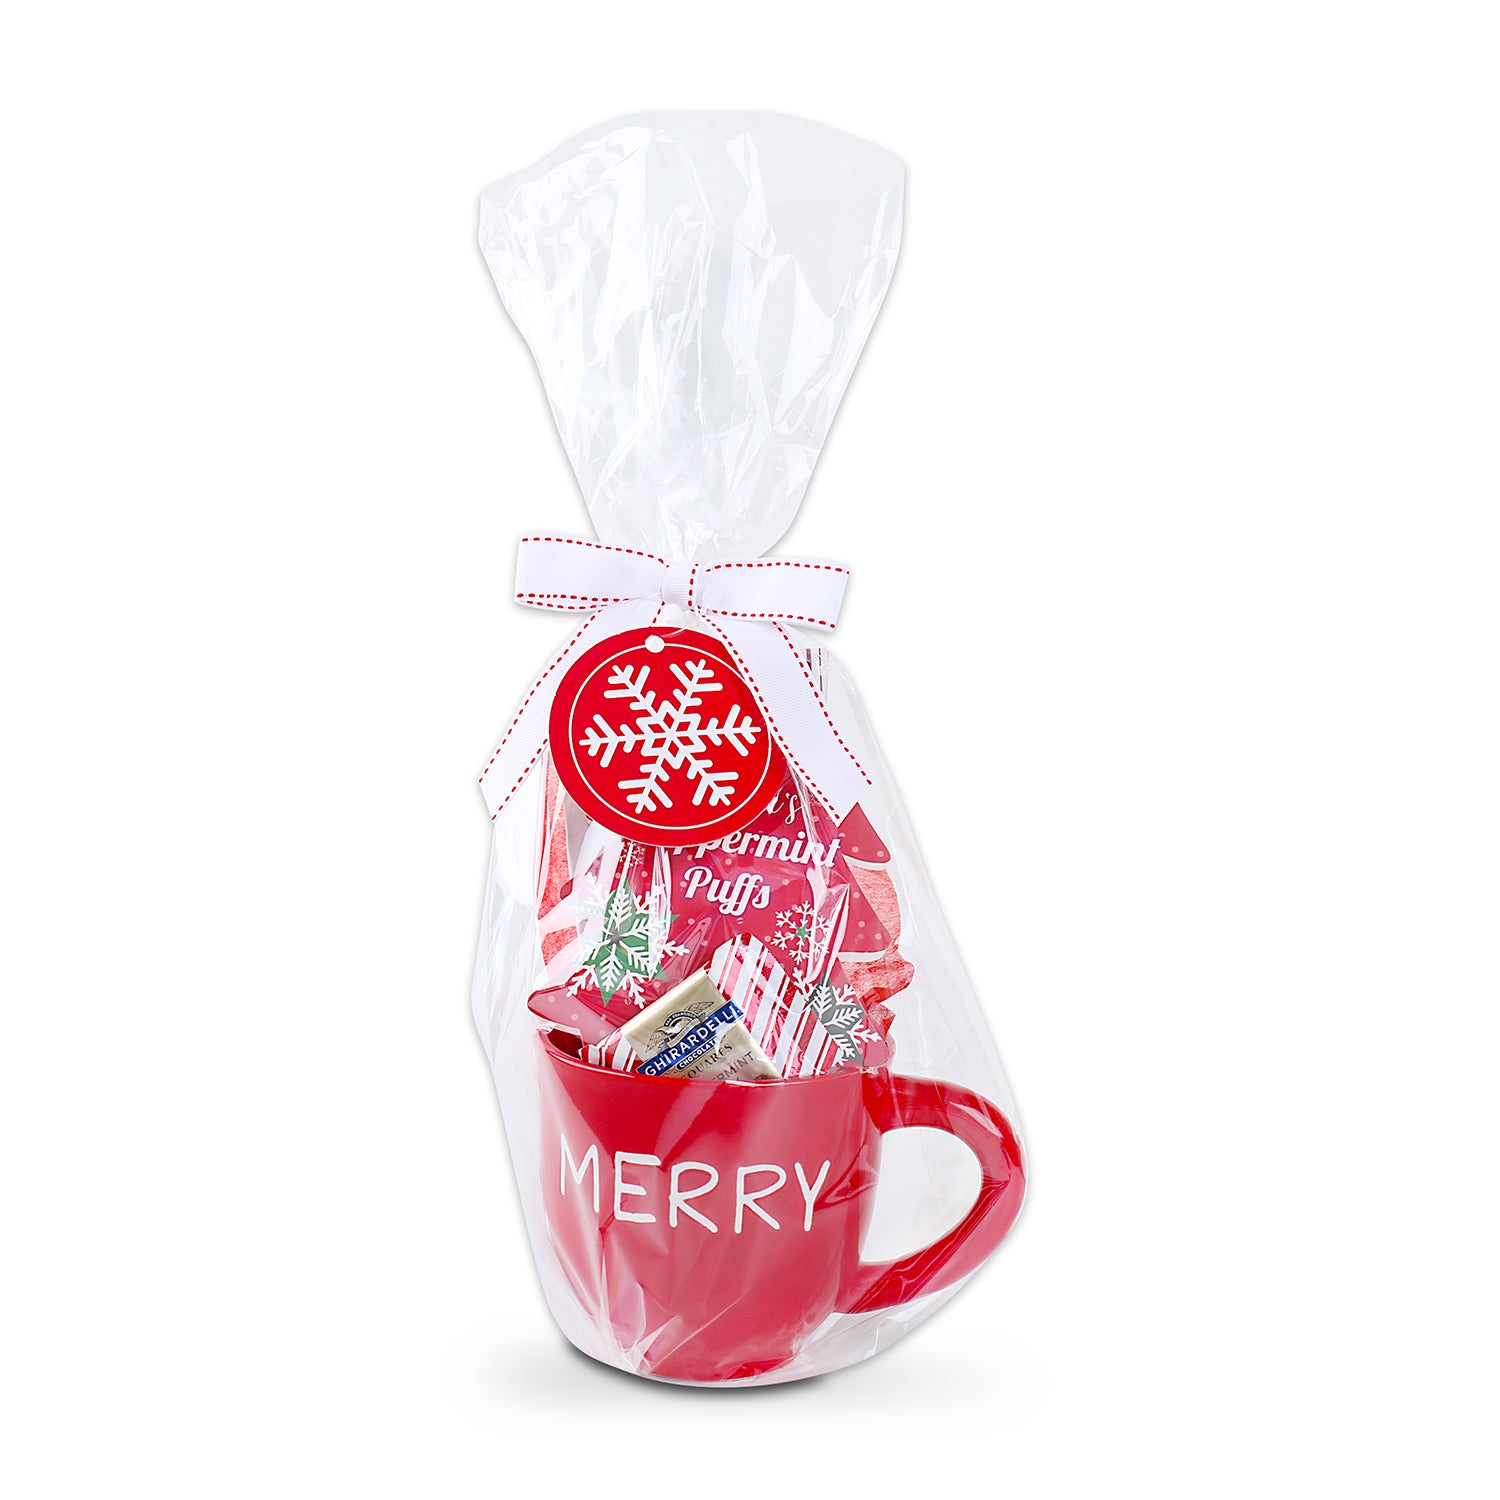 Single mug with contents wrapped in plastic as it arrives with white bow